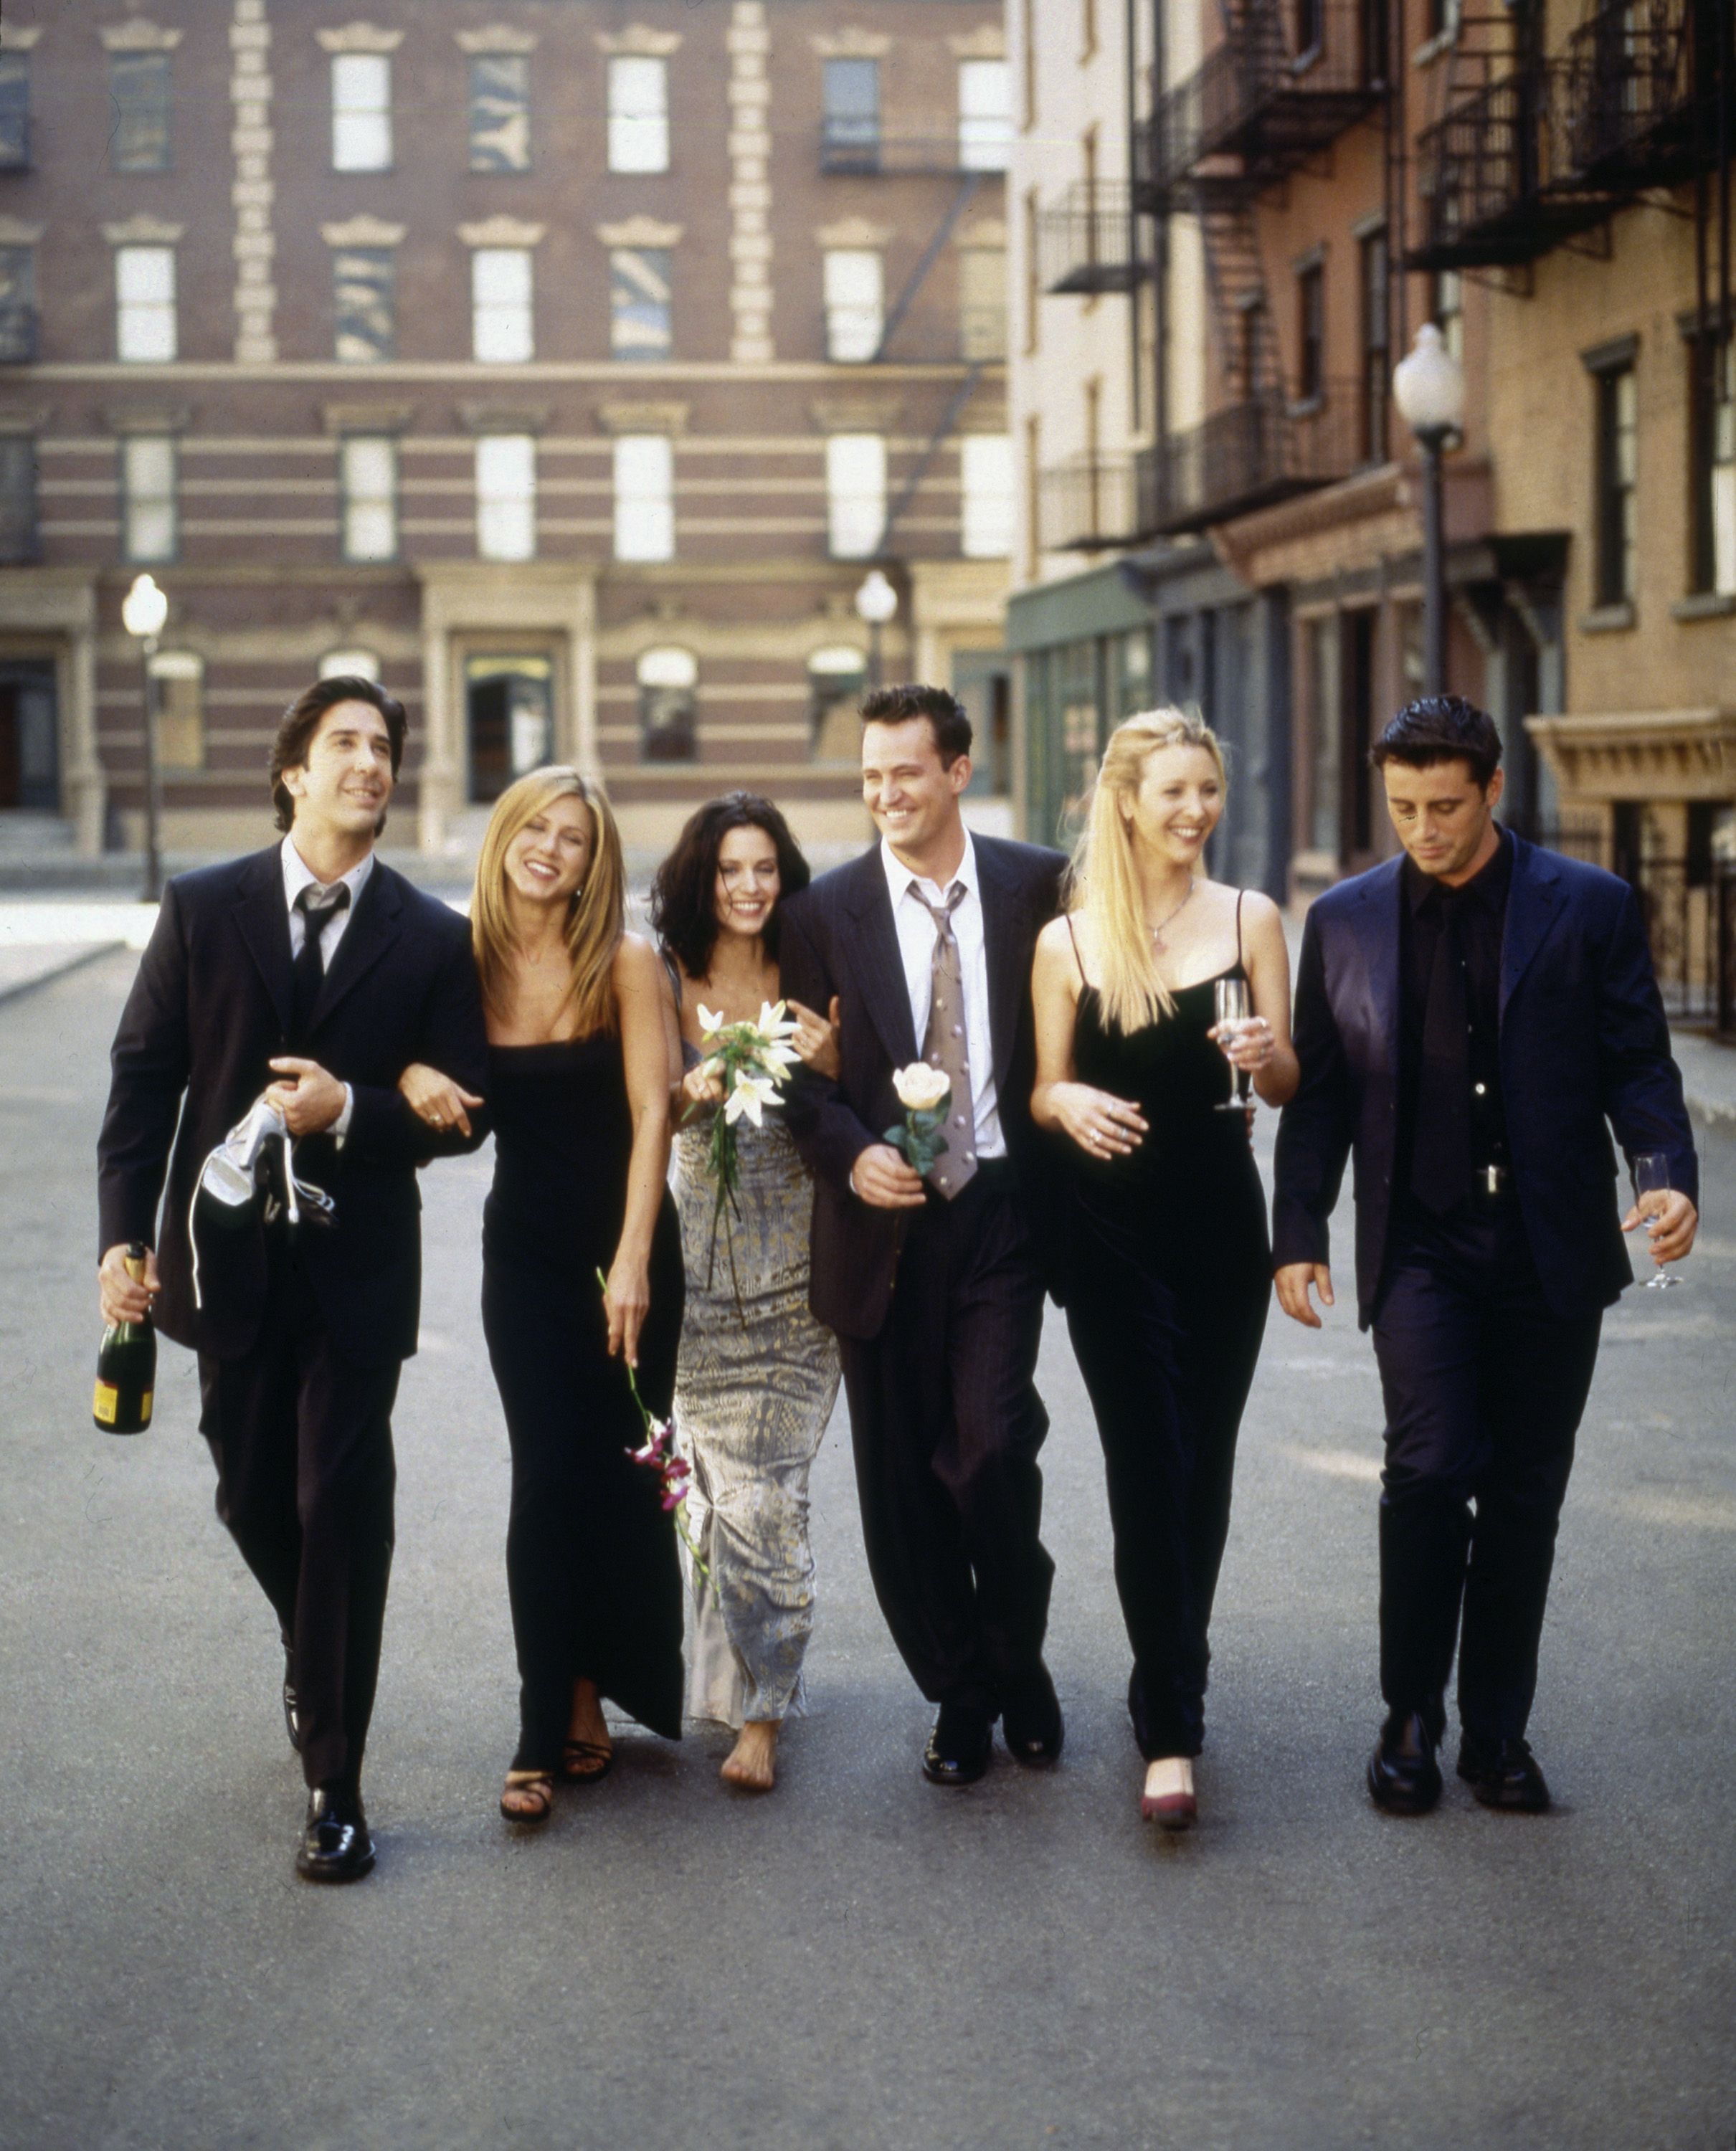 The cast of &quot;Friends&quot; walking down thecstreet